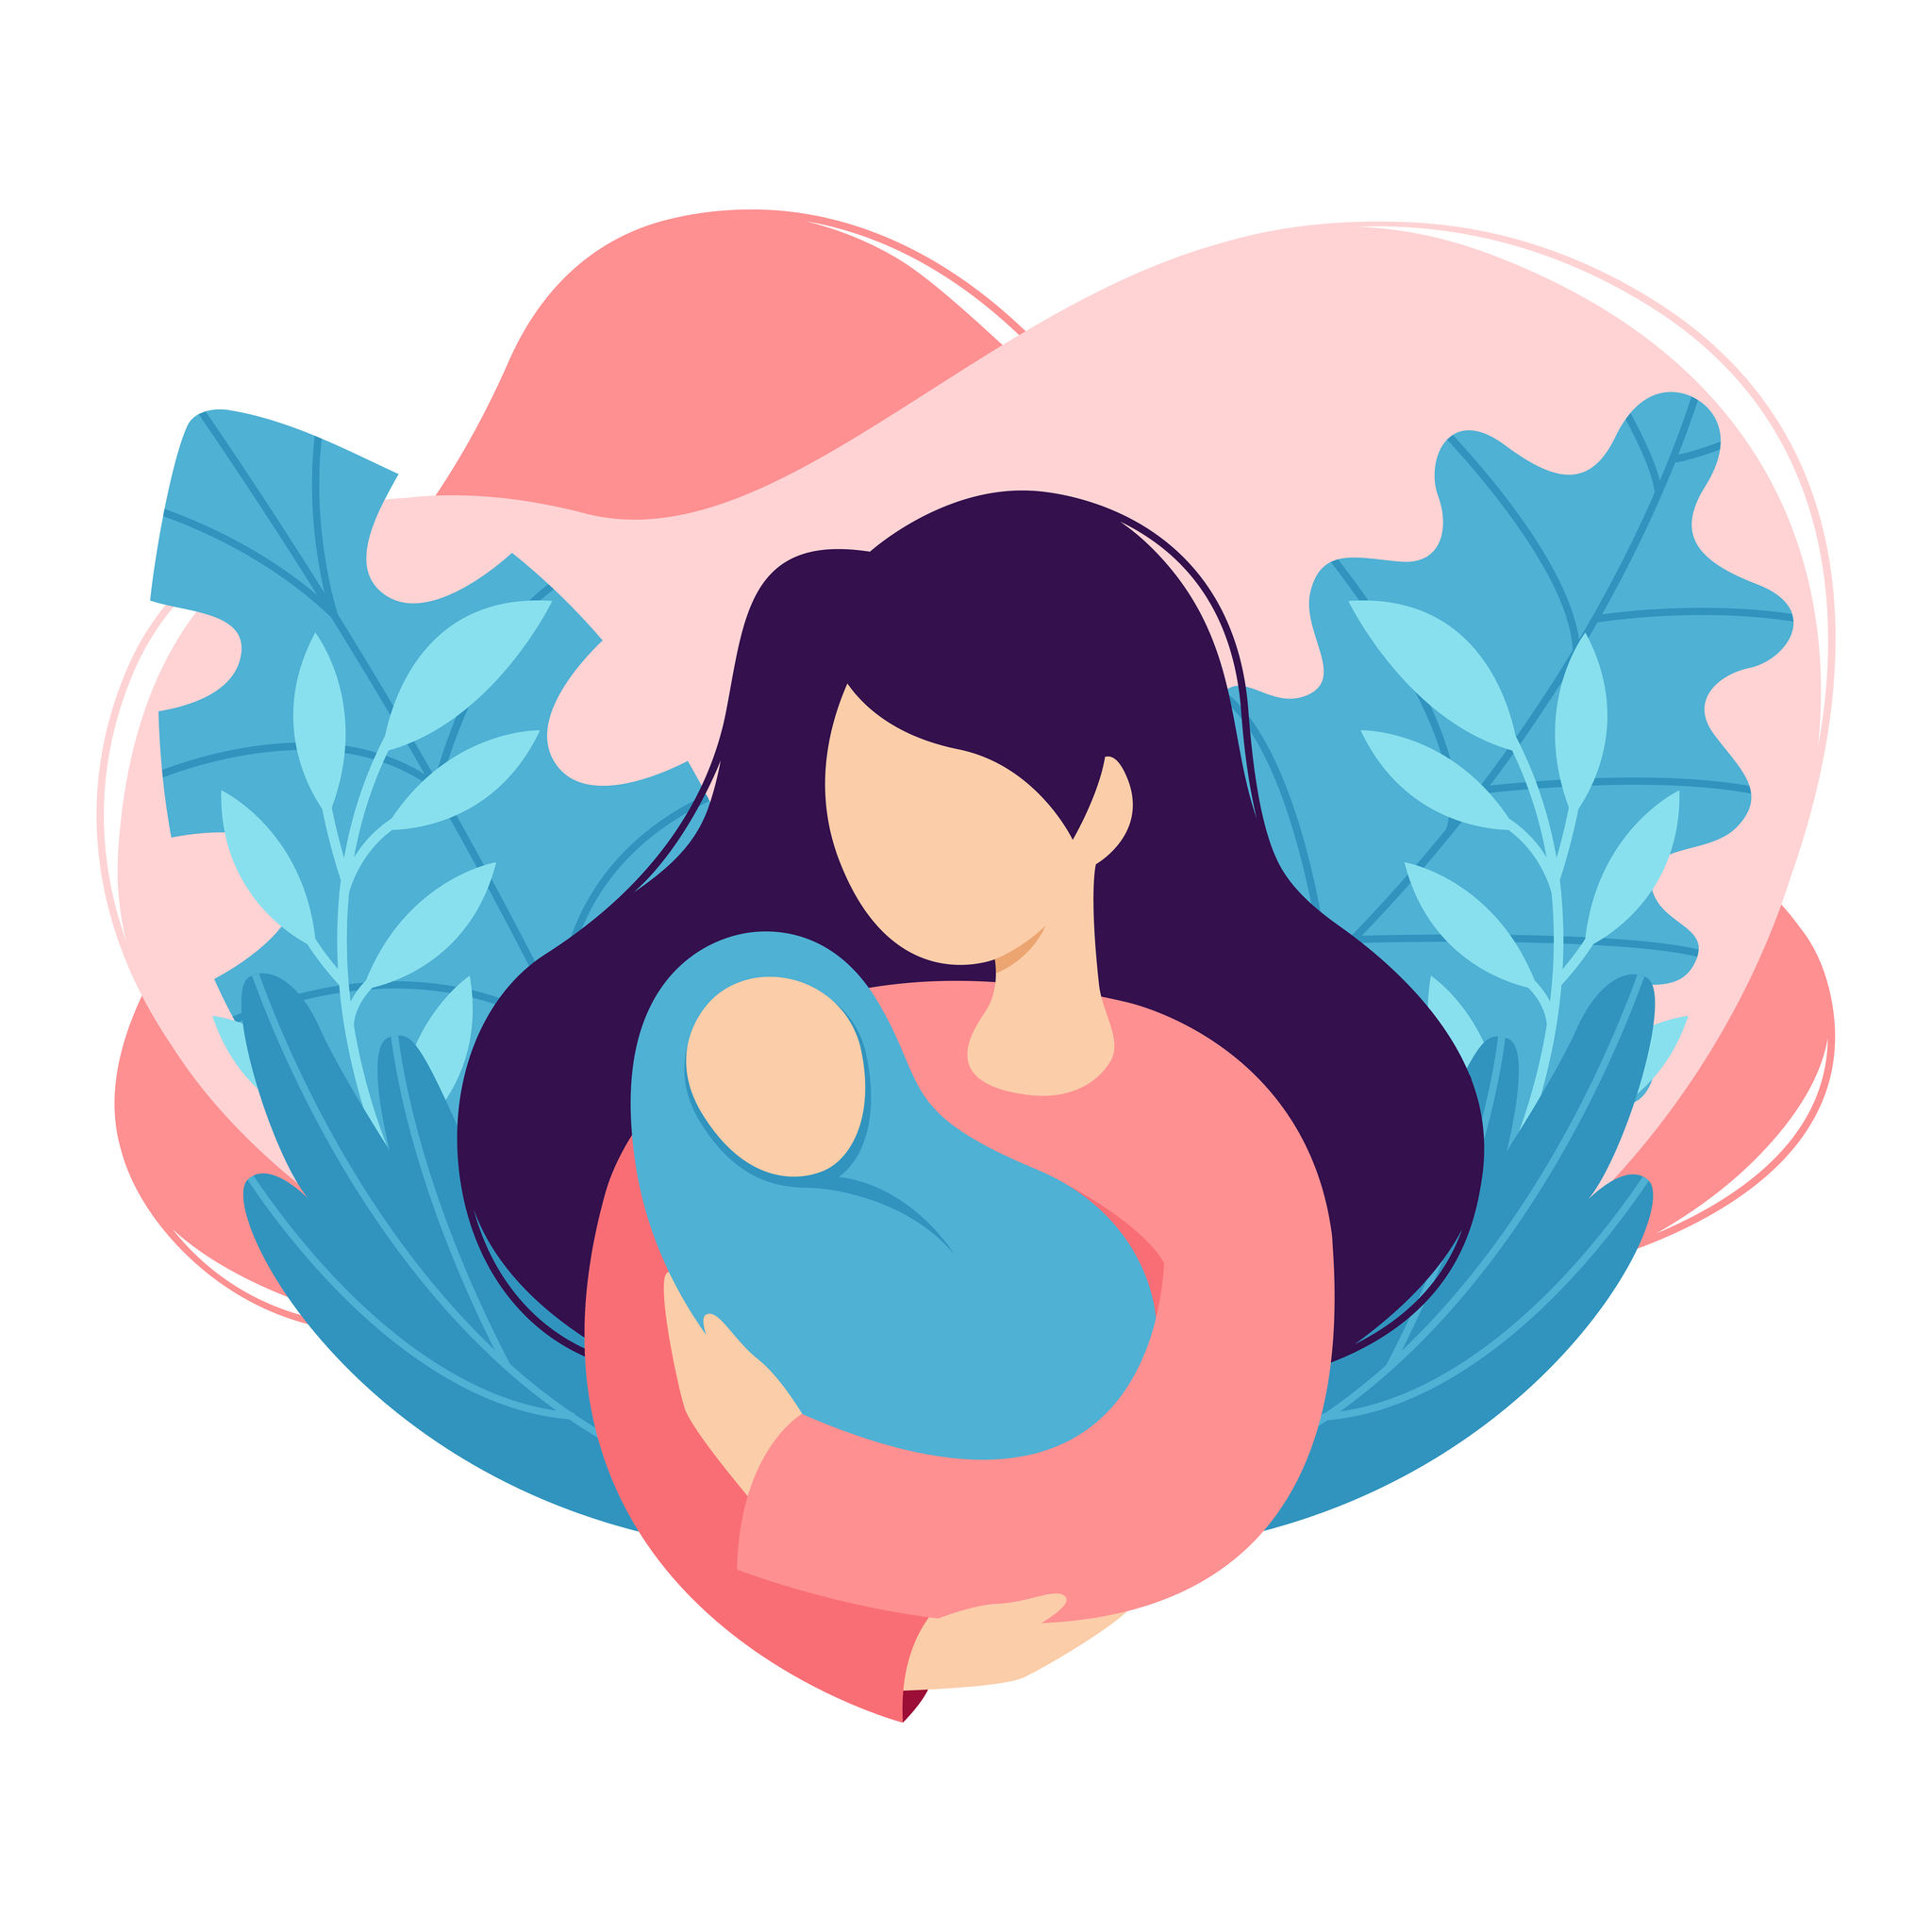 Illustrated image of a mother holding a baby in her arms